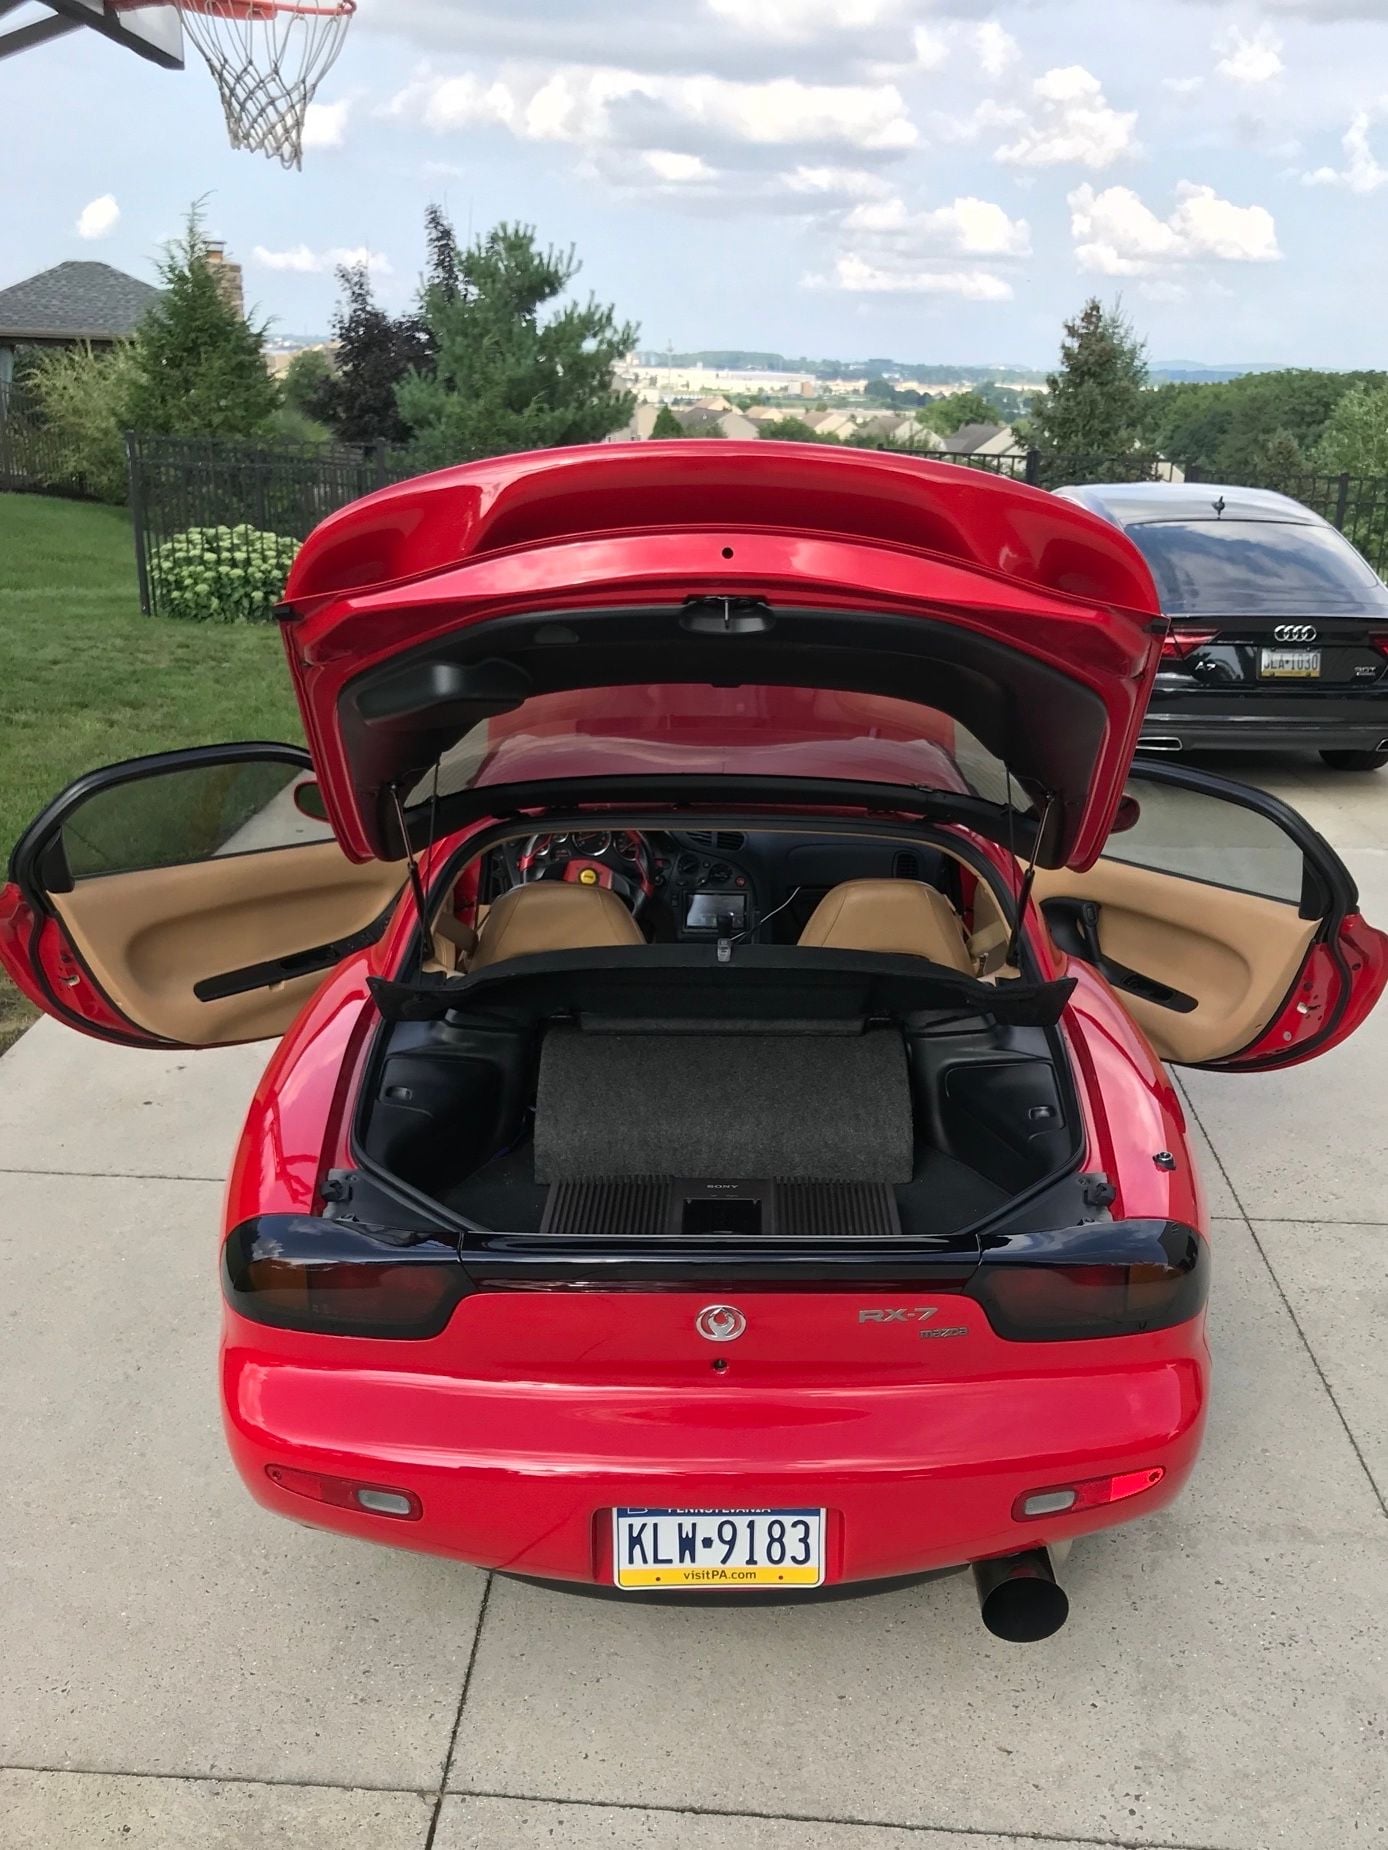 1993 Mazda RX-7 - 1993 Rx-7 LHD 5sp - Perfectly Modded - Base with Leather - Excellent Condition - Used - VIN 1993 Rx-7 VR - 50,828 Miles - Other - 2WD - Manual - Coupe - Red - Allentown, PA 18031, United States